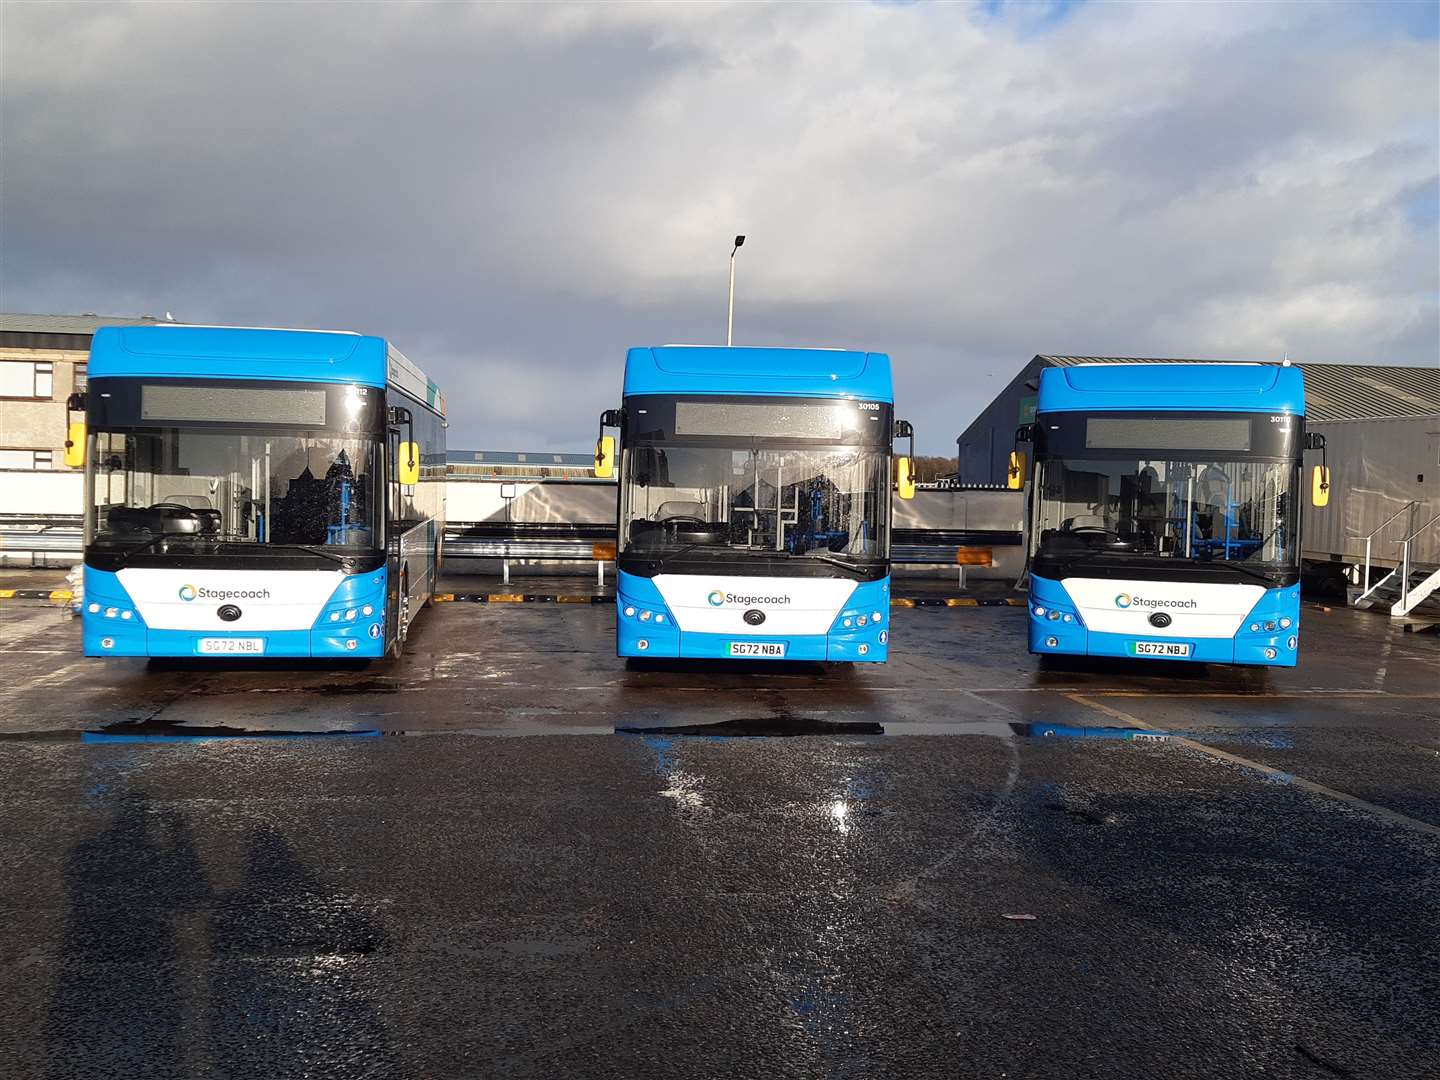 Some of the Inverness electric fleet.